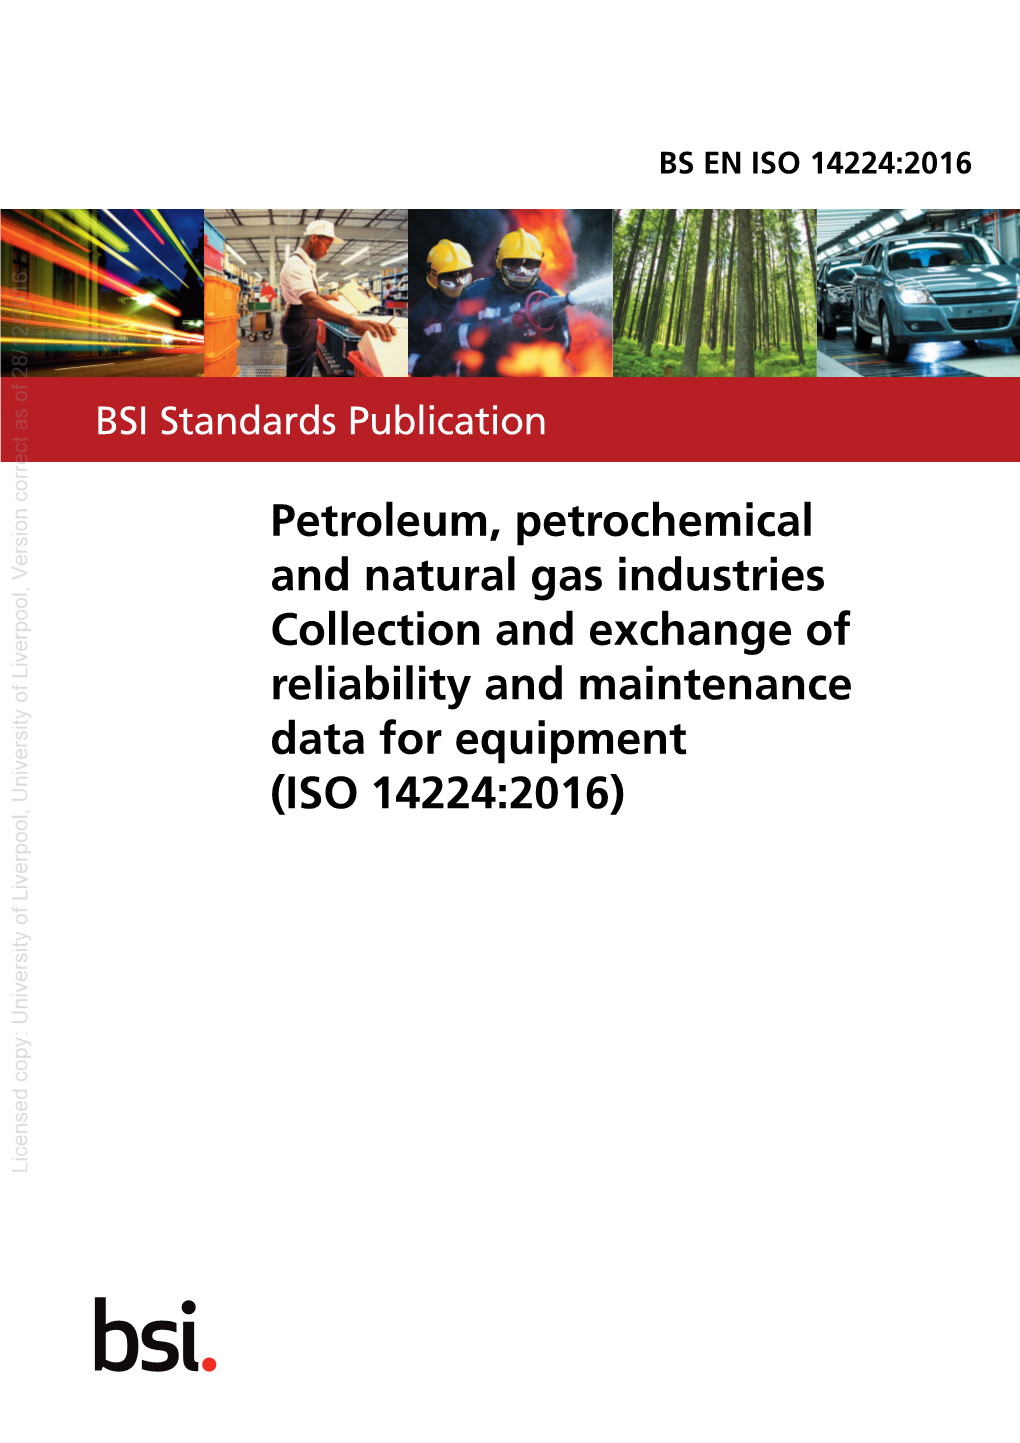 Petroleum, Petrochemical and Natural Gas Industries — Collection and Exchange of Reliability and Maintenance Data for Equipment (ISO 14224:2016)